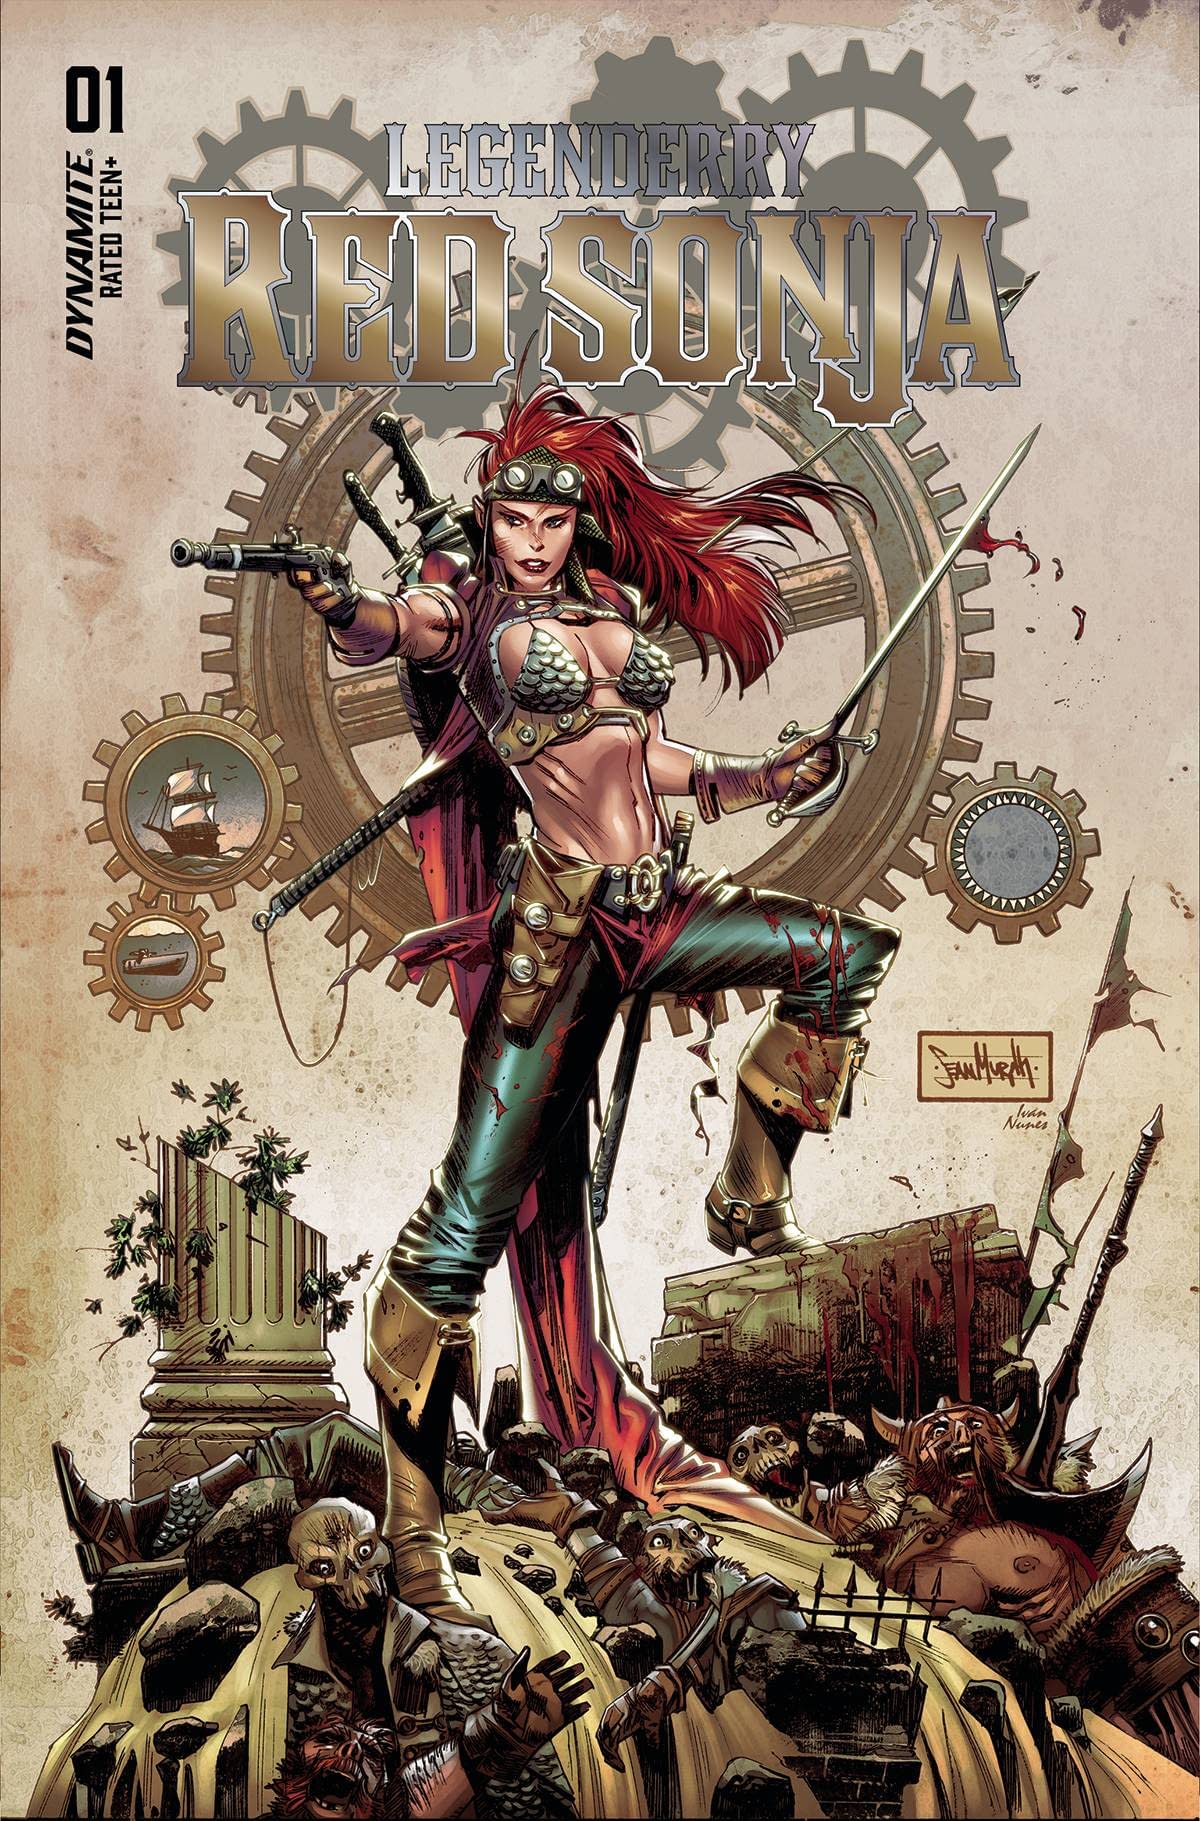 Cover image for Leganderry Red Sonja #1